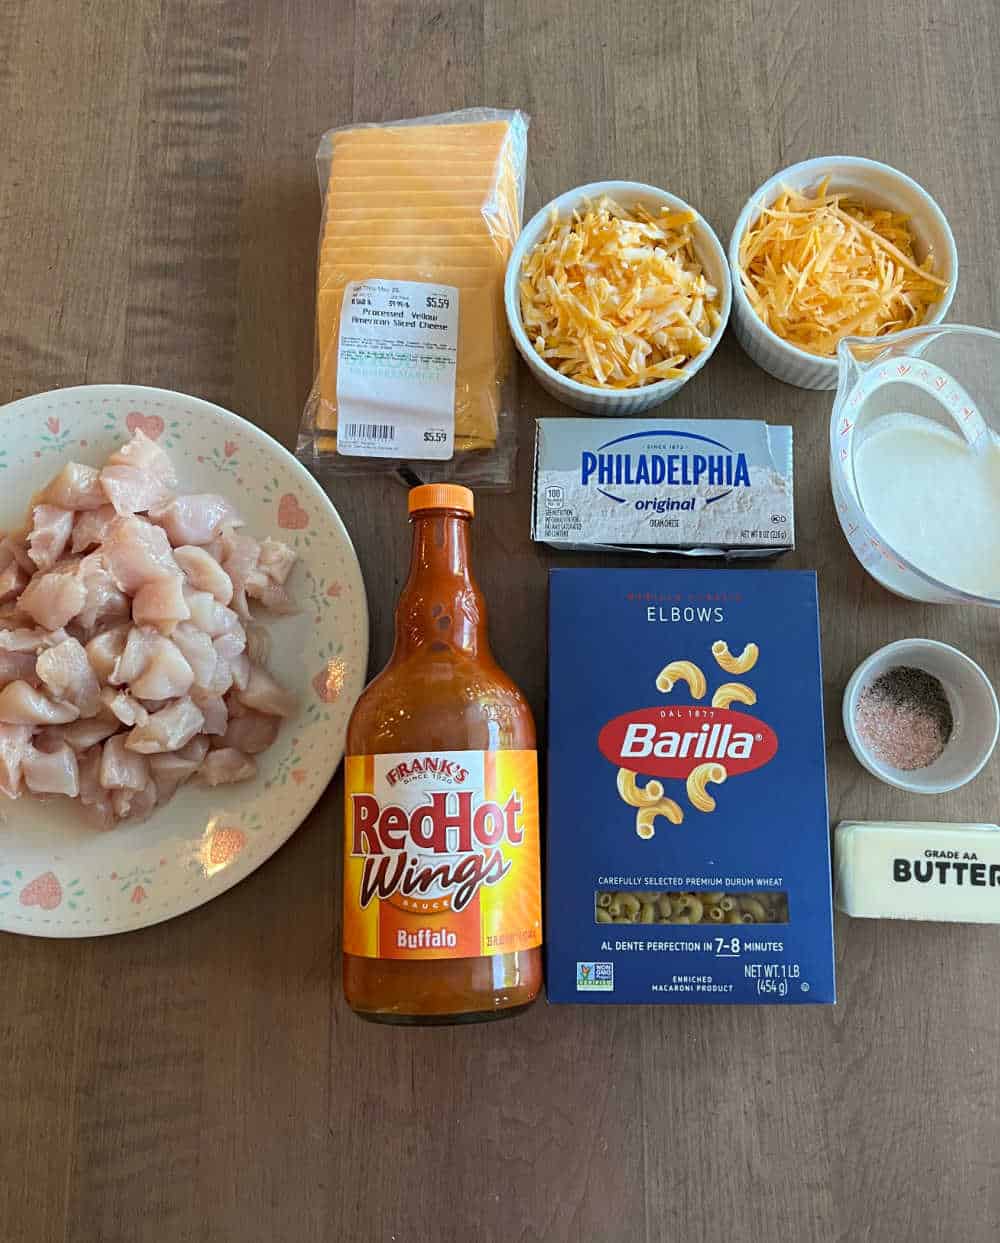 cubed chicken, Buffalo wing sauce, elbow macaroni, cheese, cream cheese, heavy cream, butter, spices.